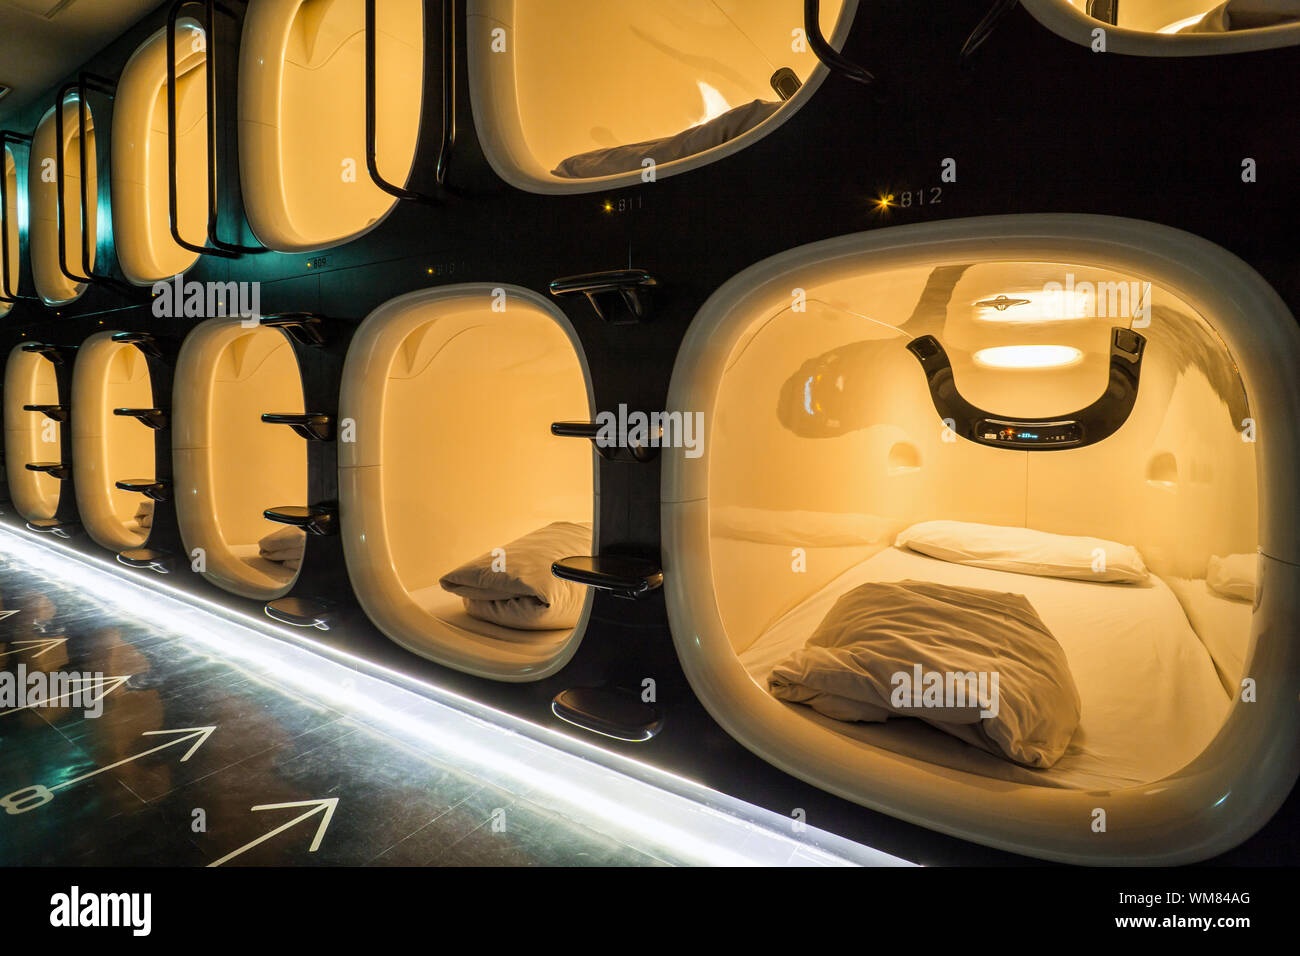 Capsule Hotel Beds in Kyoto, Japan Stock Photo